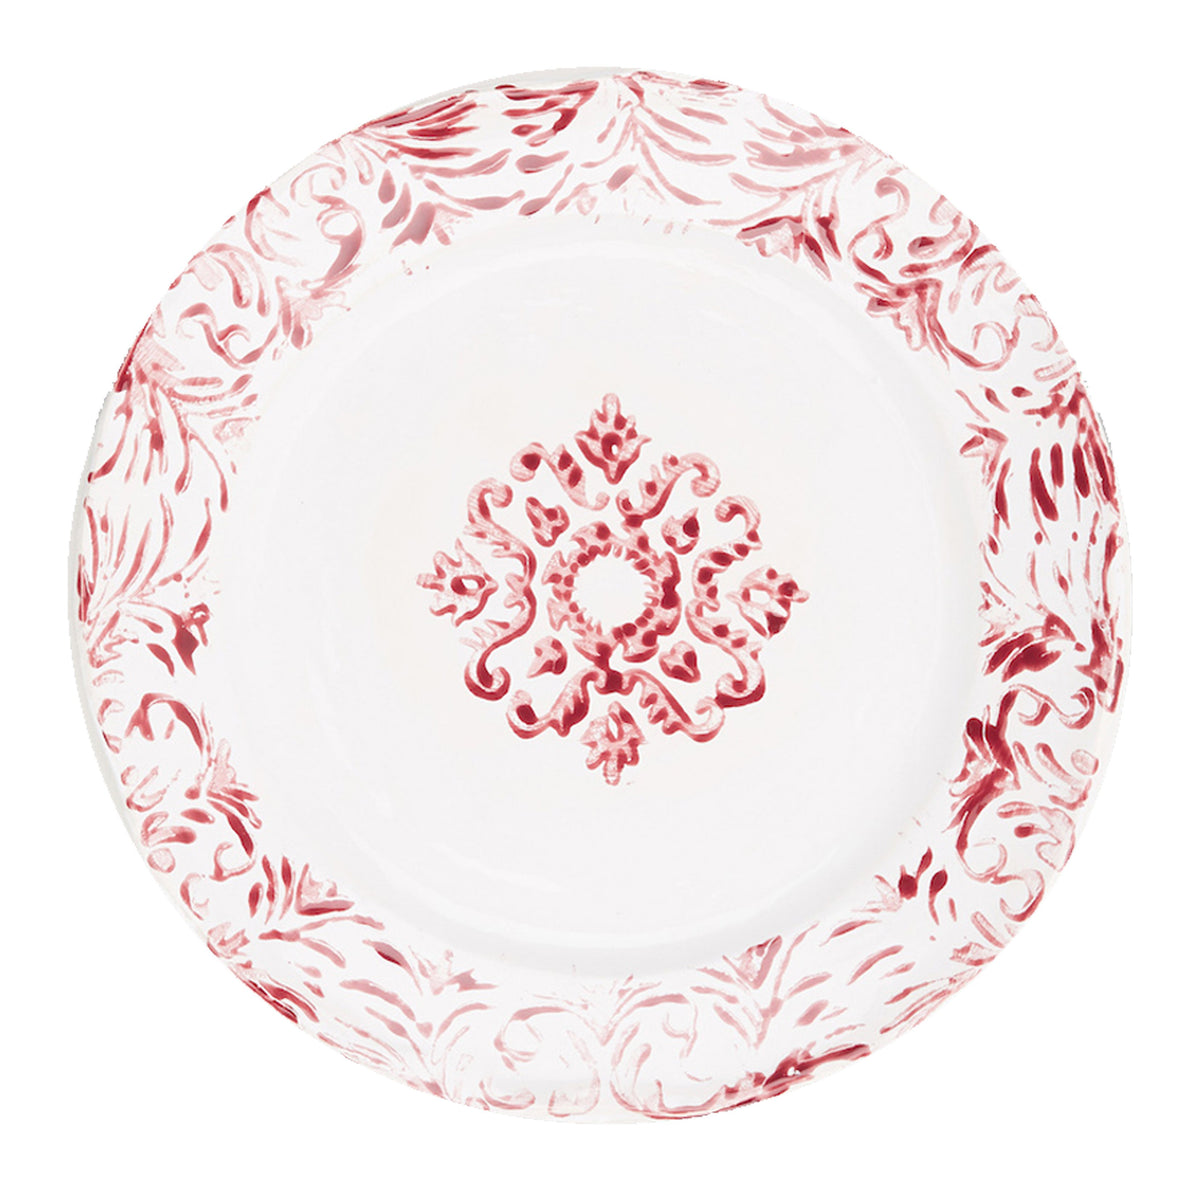 "Floral" Dinner Plate in Red